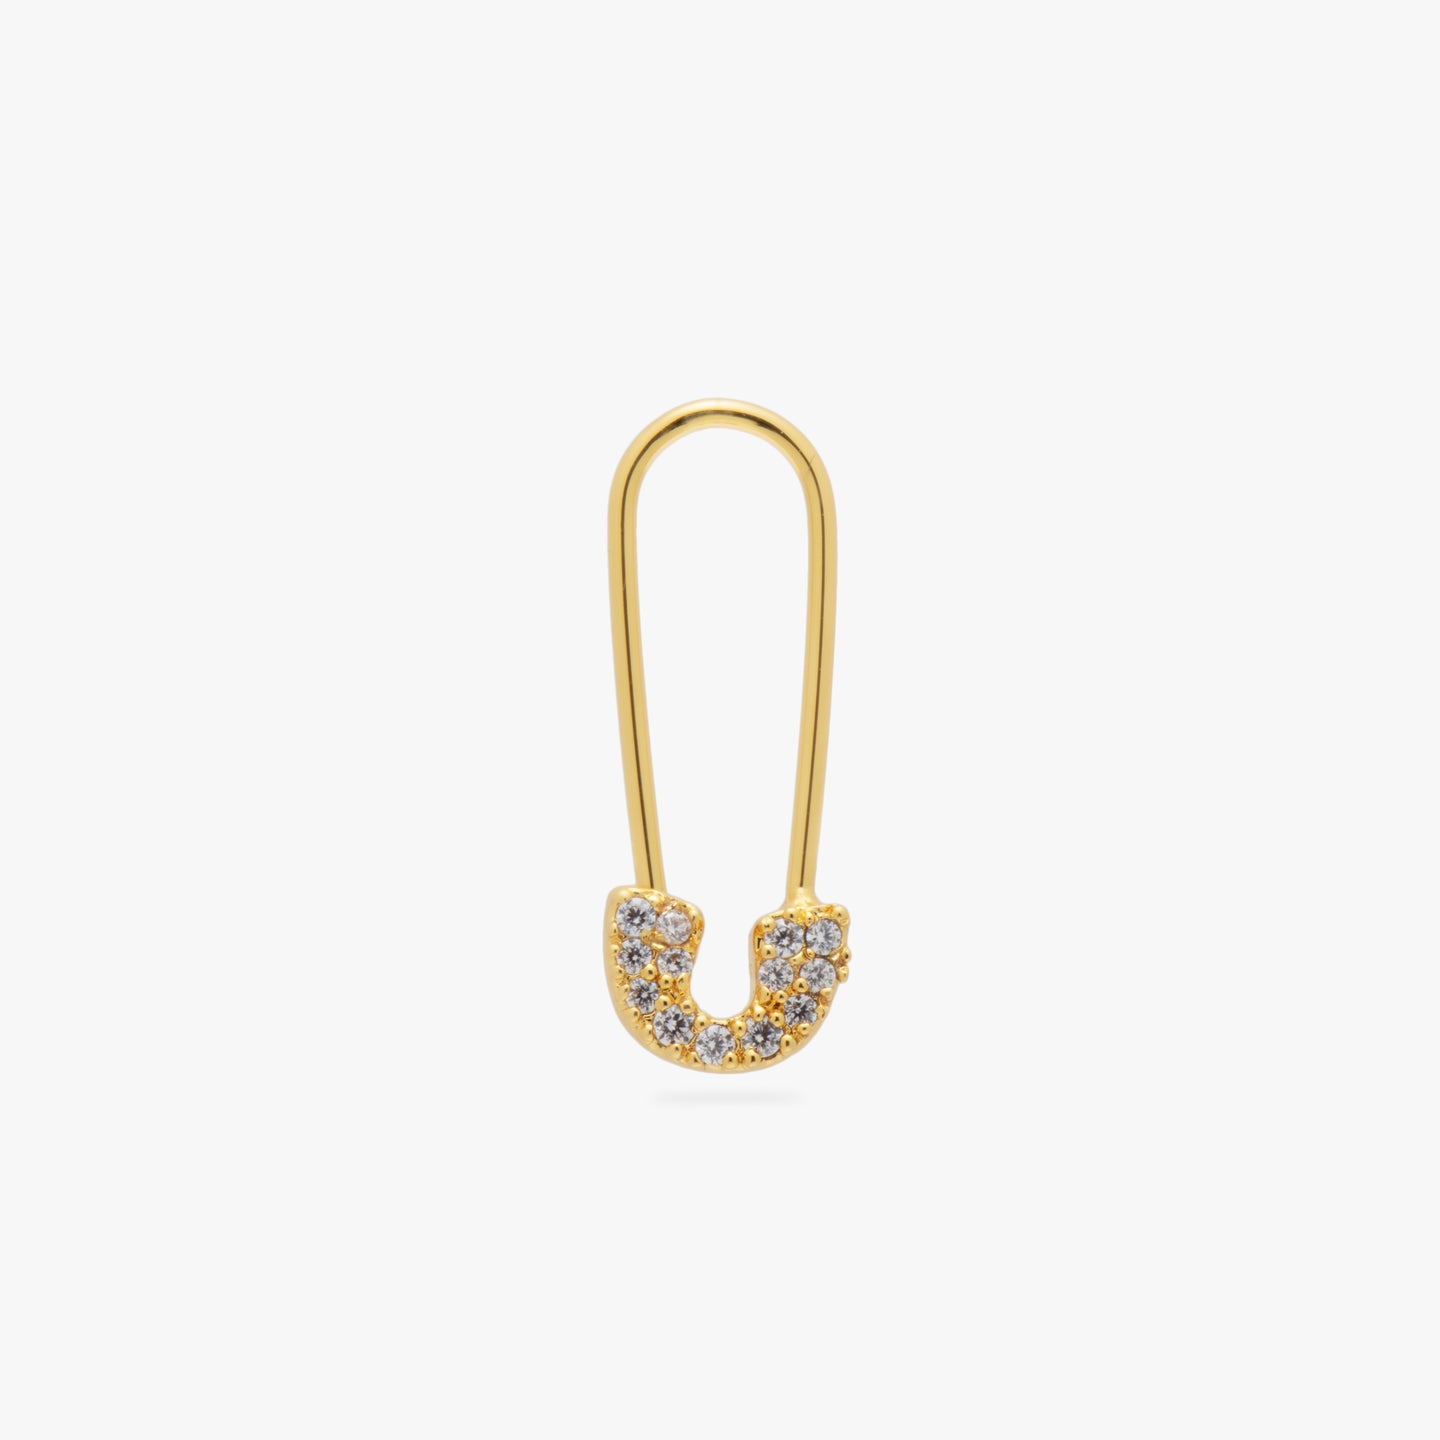 A gold/clear pave safety pin shaped earring color:null|gold/clear